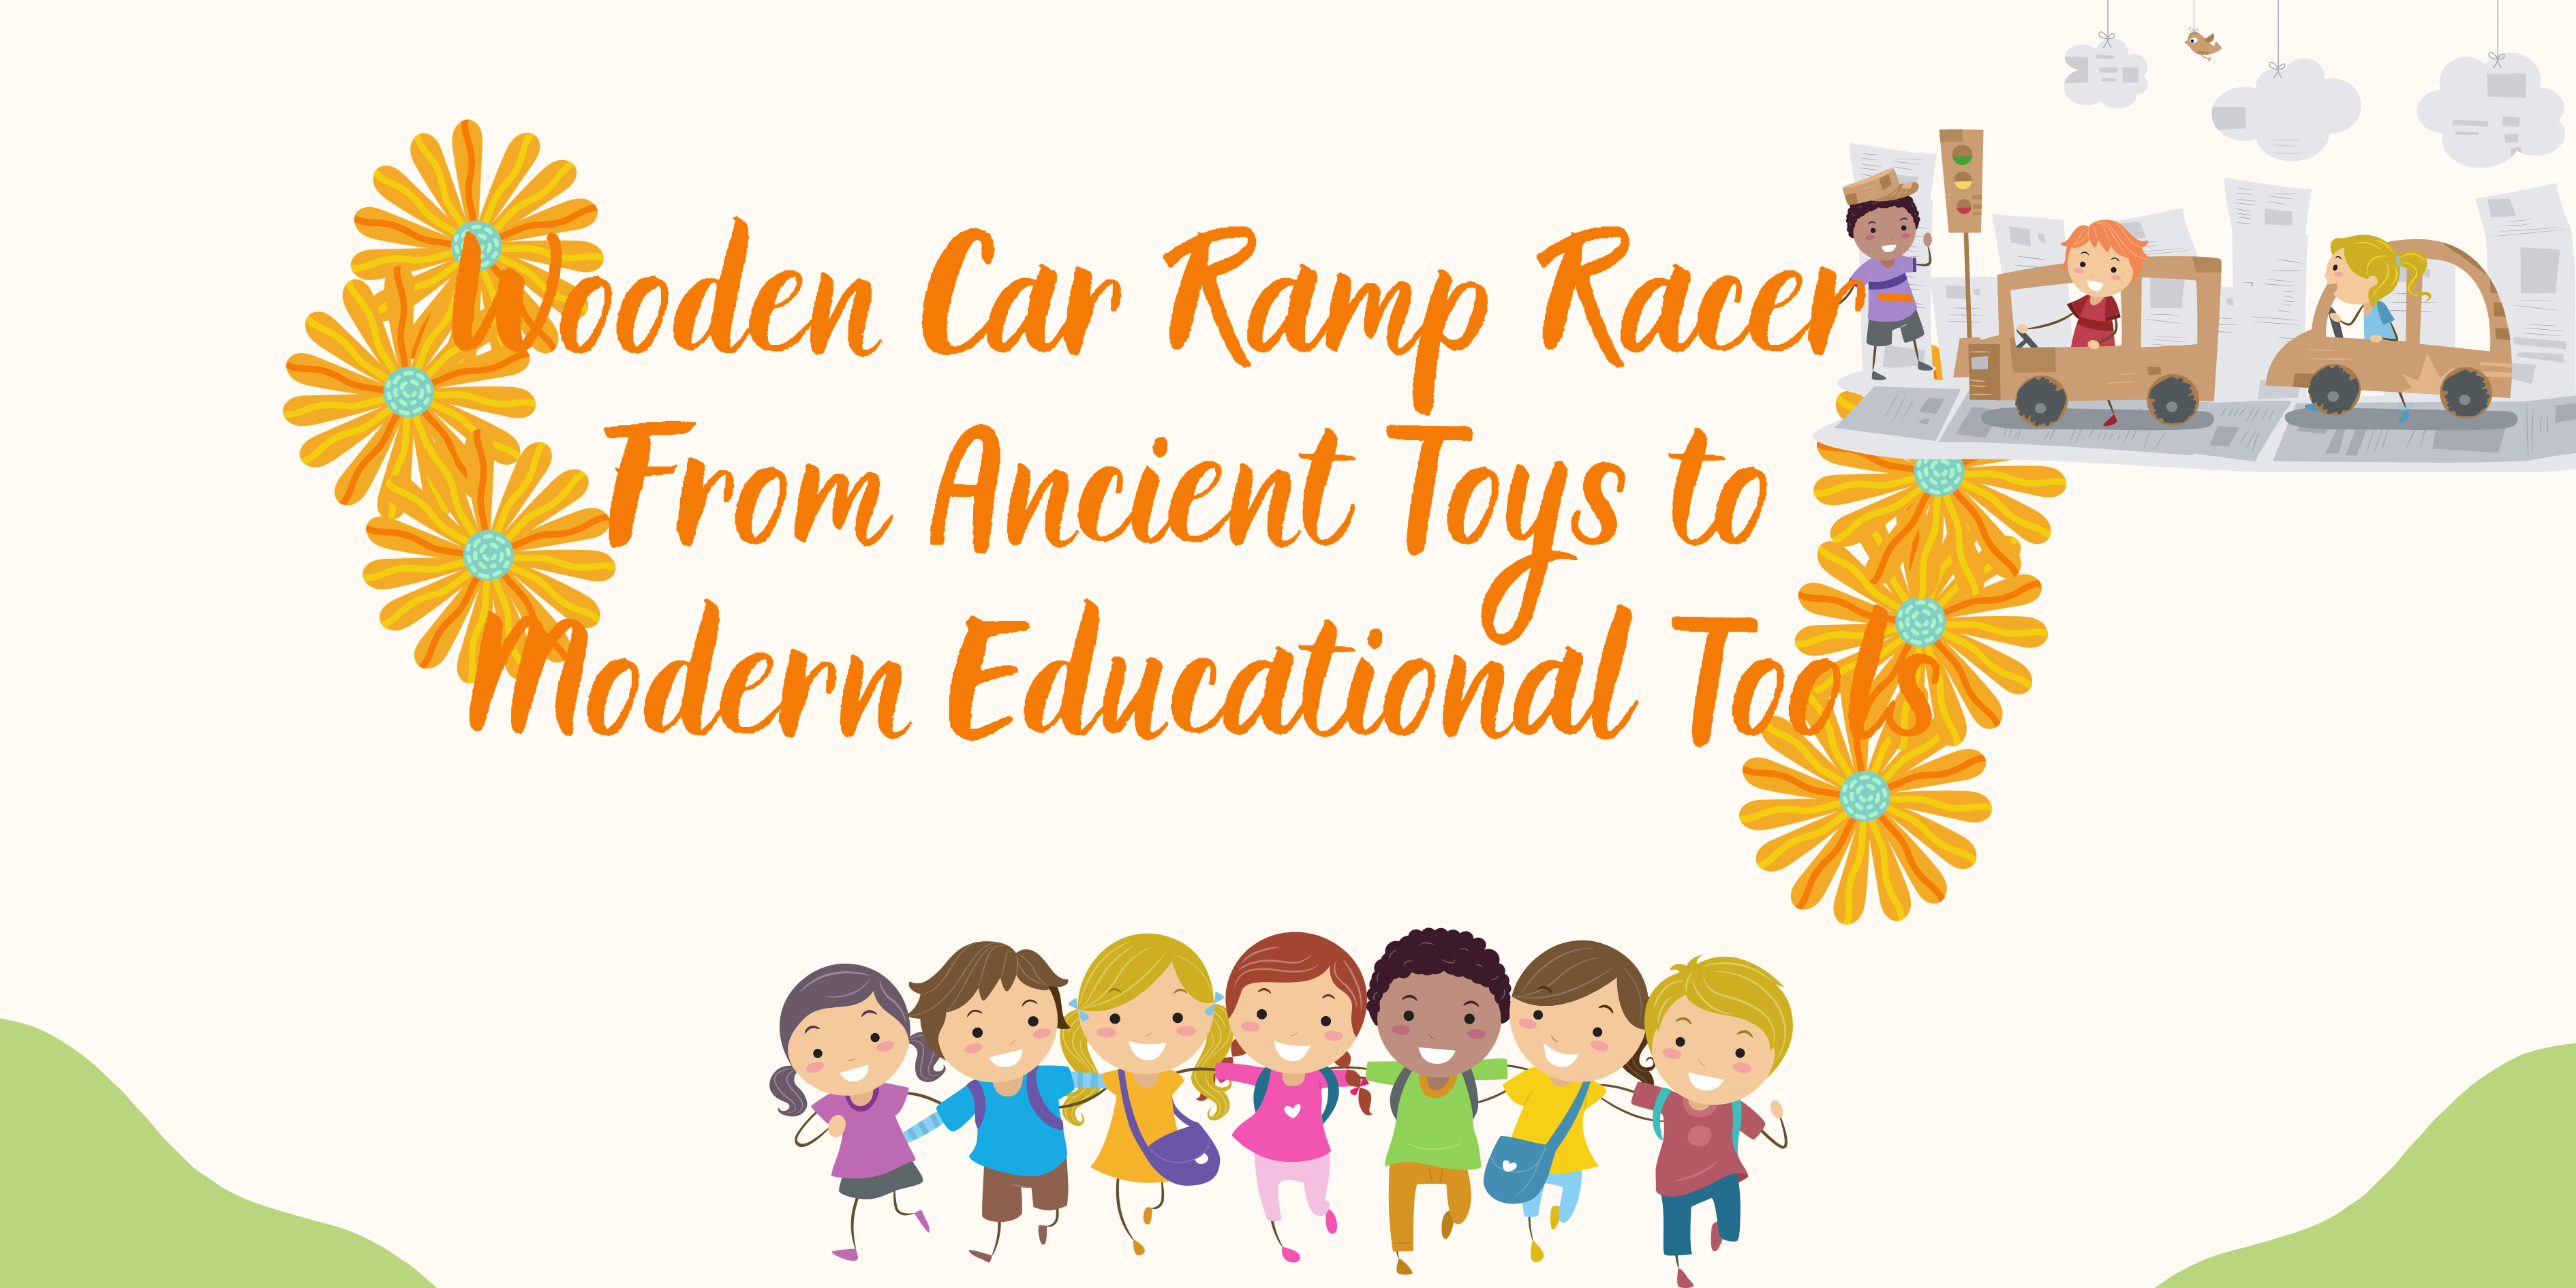 Historical Evolution of Wooden Car Ramp Racer: From Ancient Toys to Modern Educational Tools